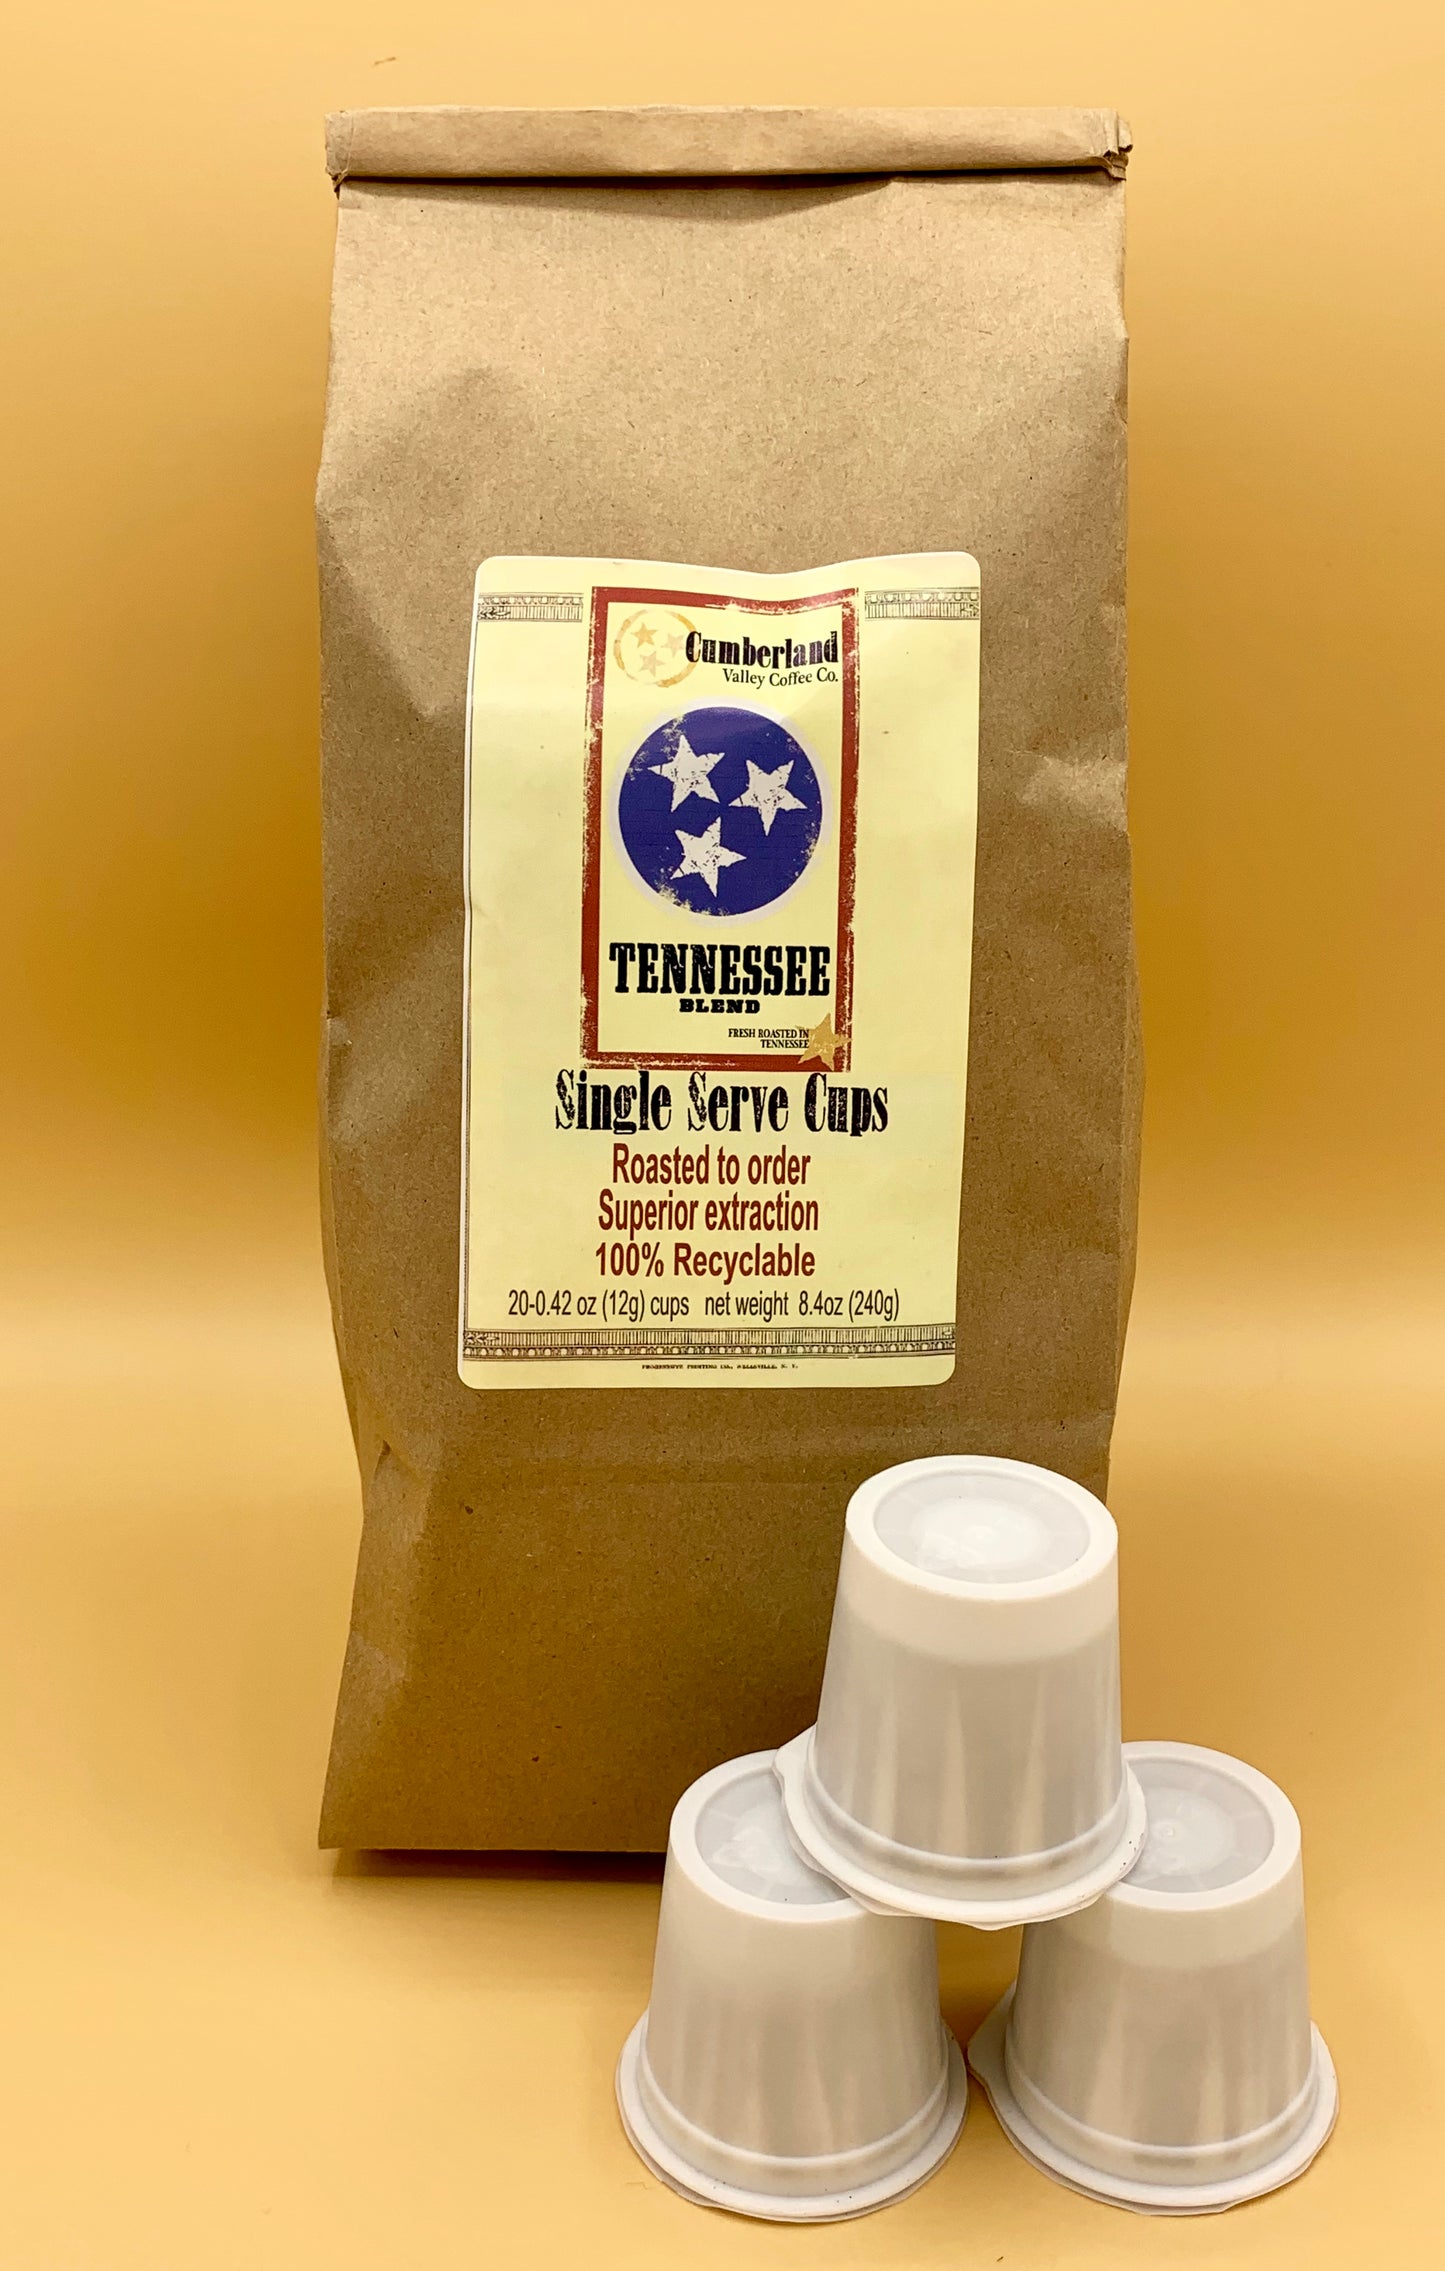 Single Serve Cups - Tennessee Blend Coffee